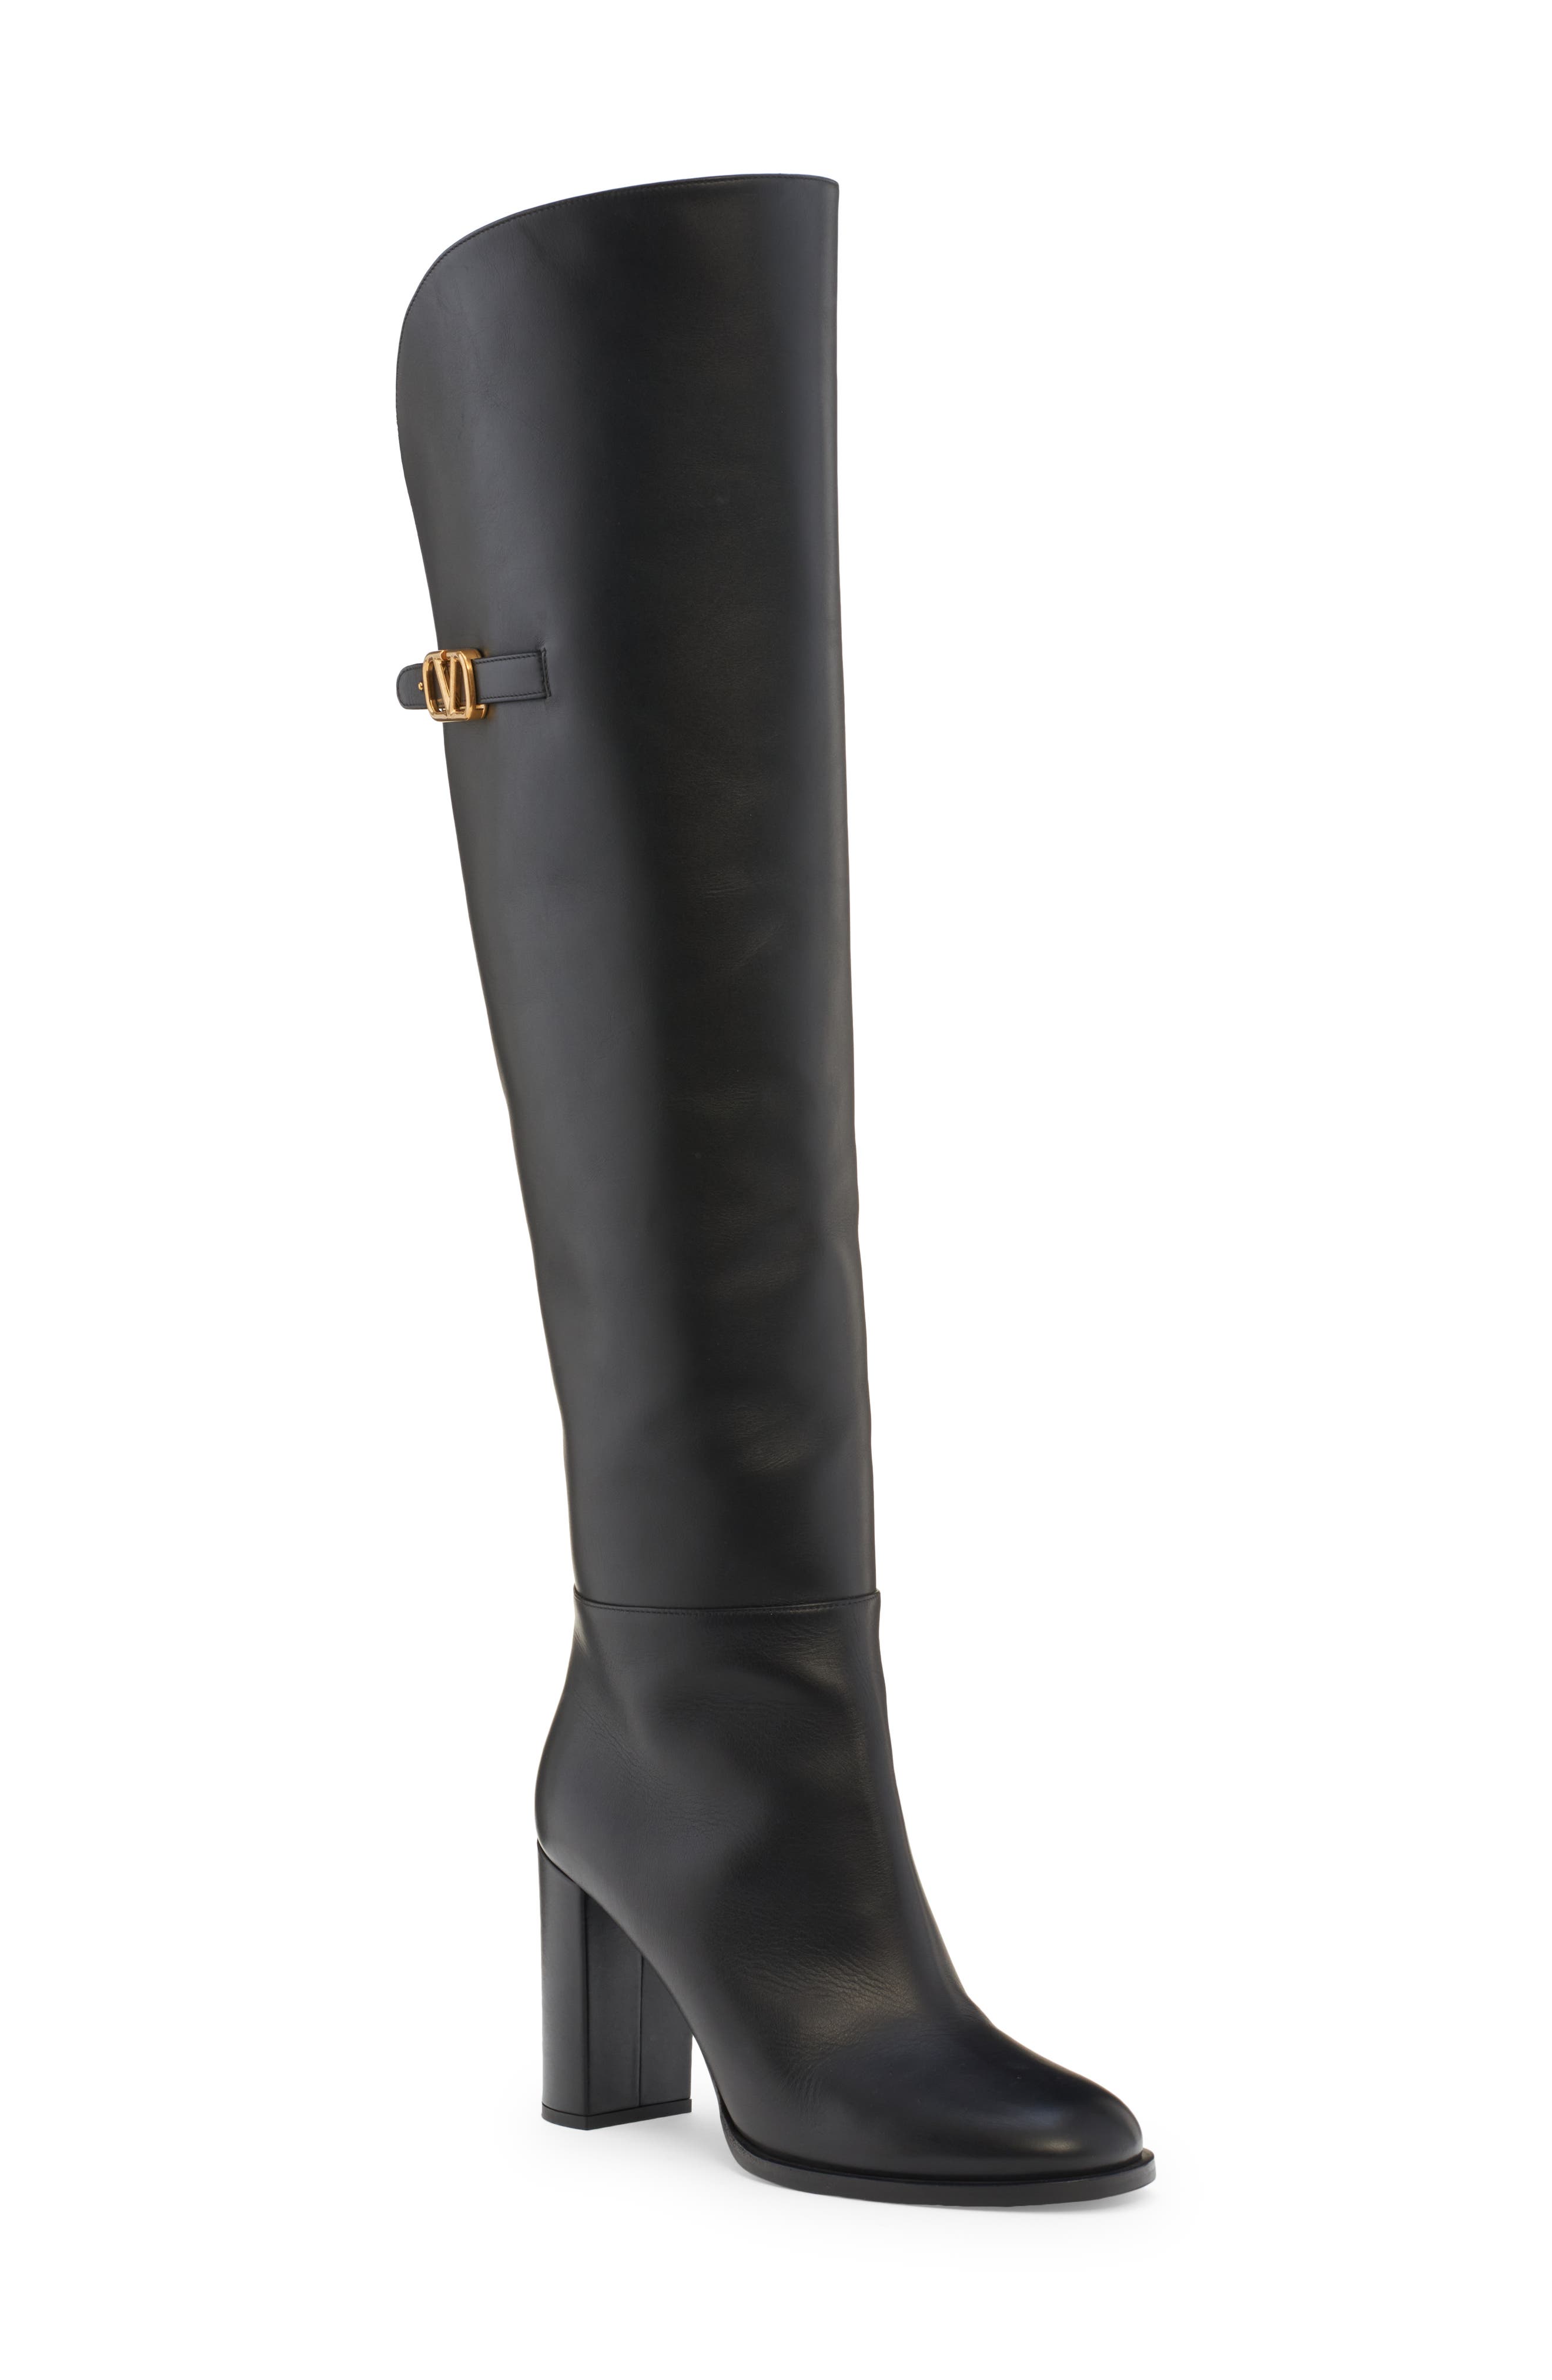 VLogo Signature leather knee-high boots